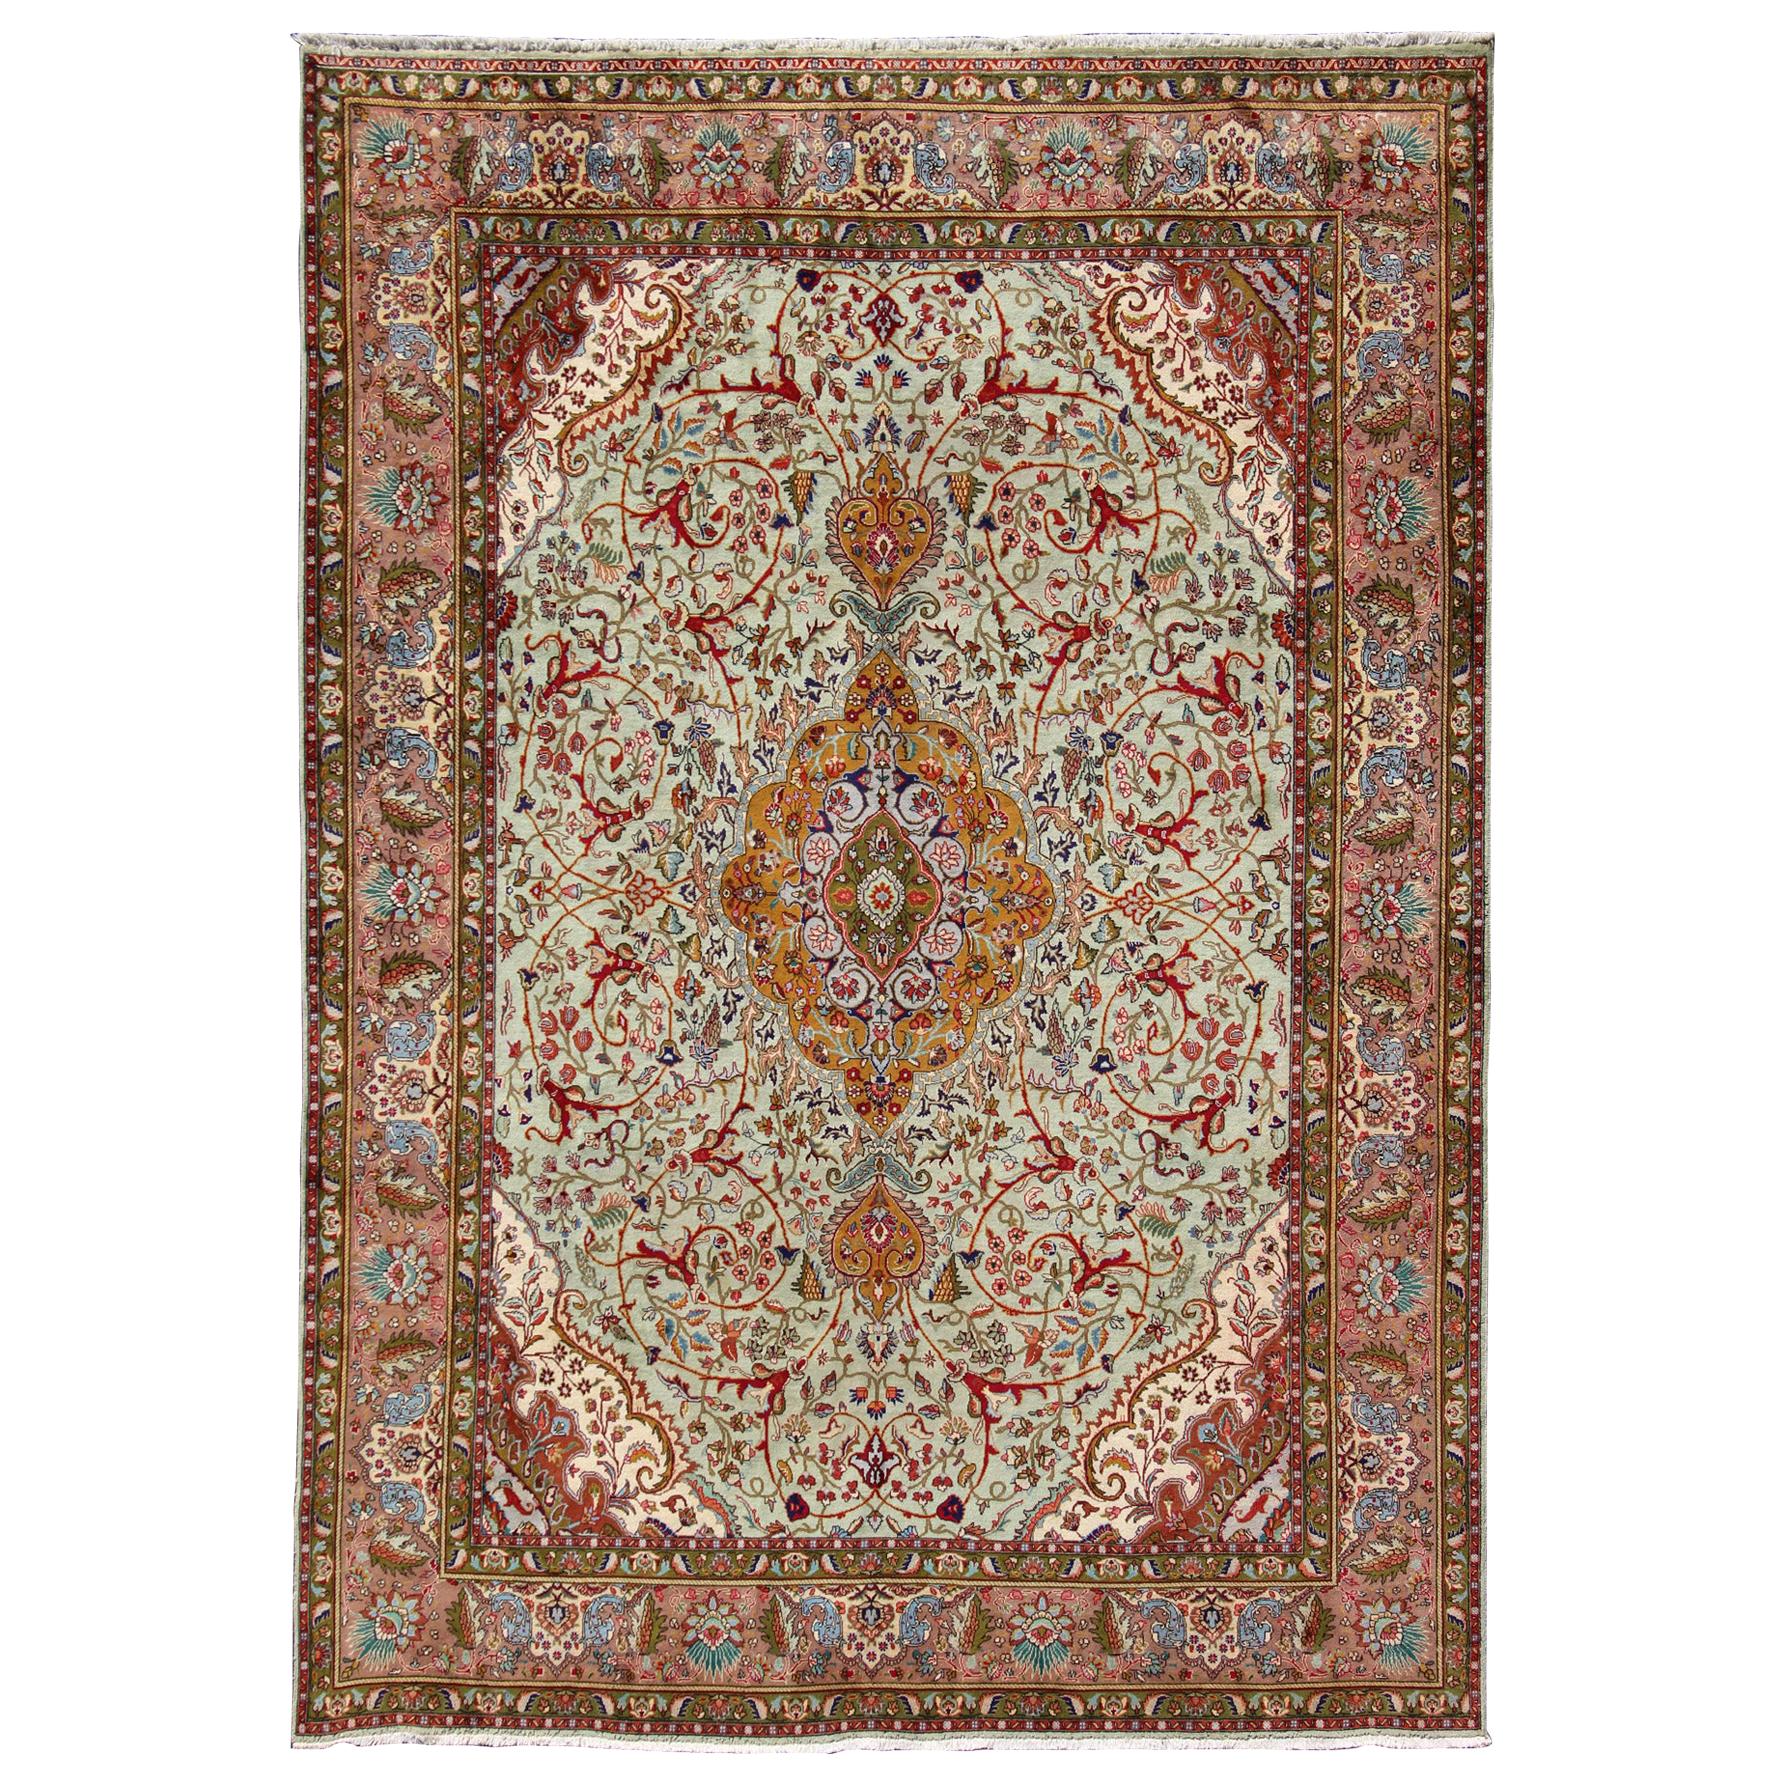 Classic Persian Tabriz Vintage Rug in Celadon Green, Salmon and Multi-Colors